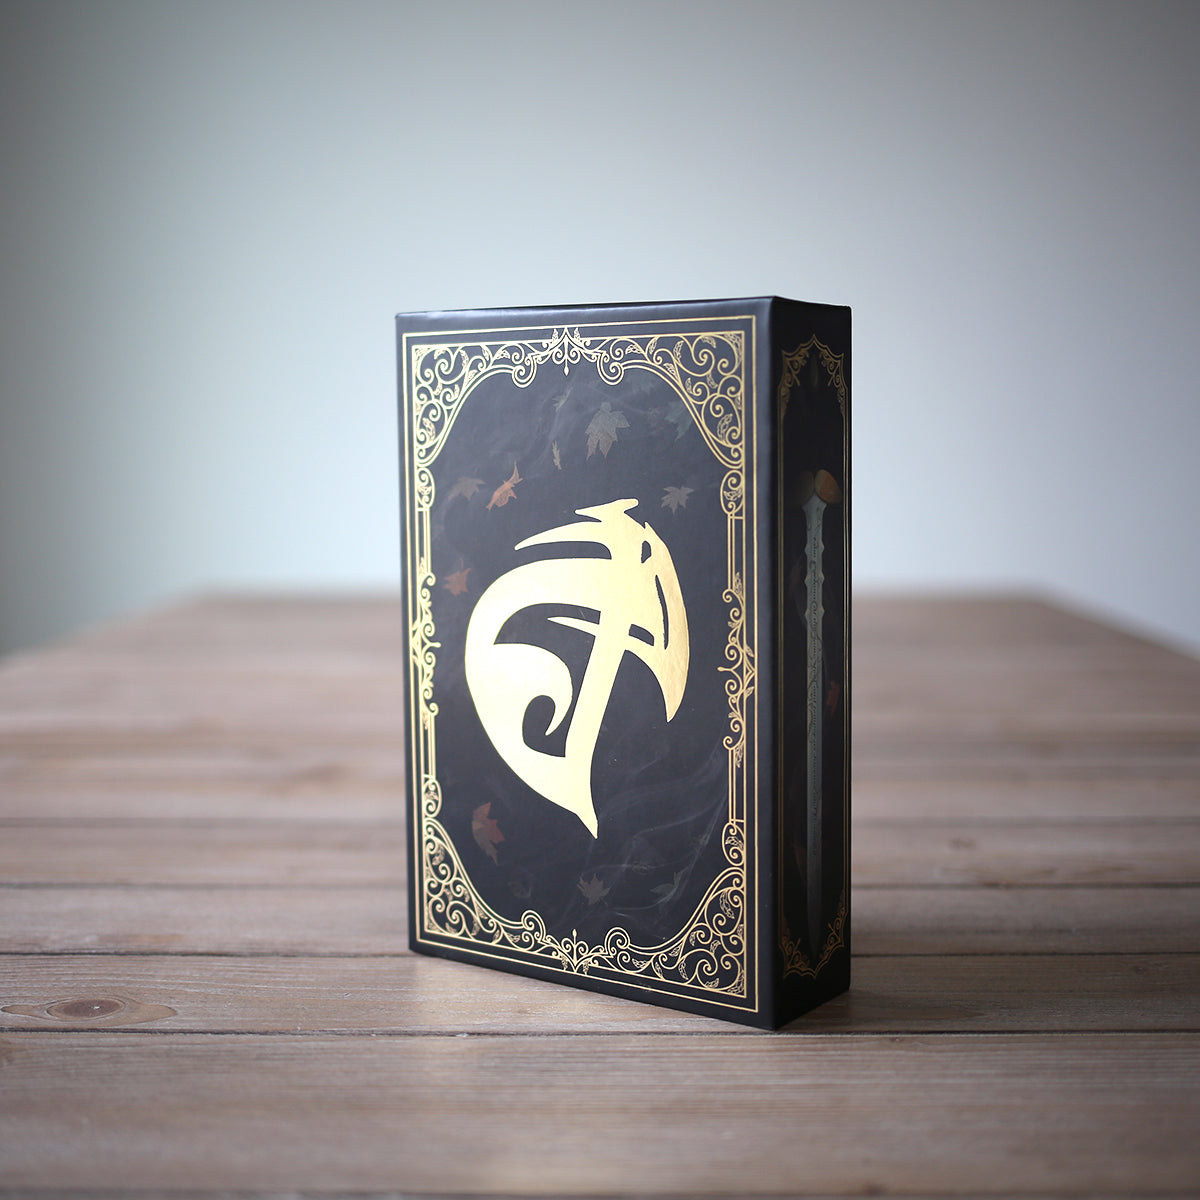 Chain of Gold Slipcase from the Cassandra Clare Collection. Includes gold foiling, rune art, Cortana sword, and a quote.